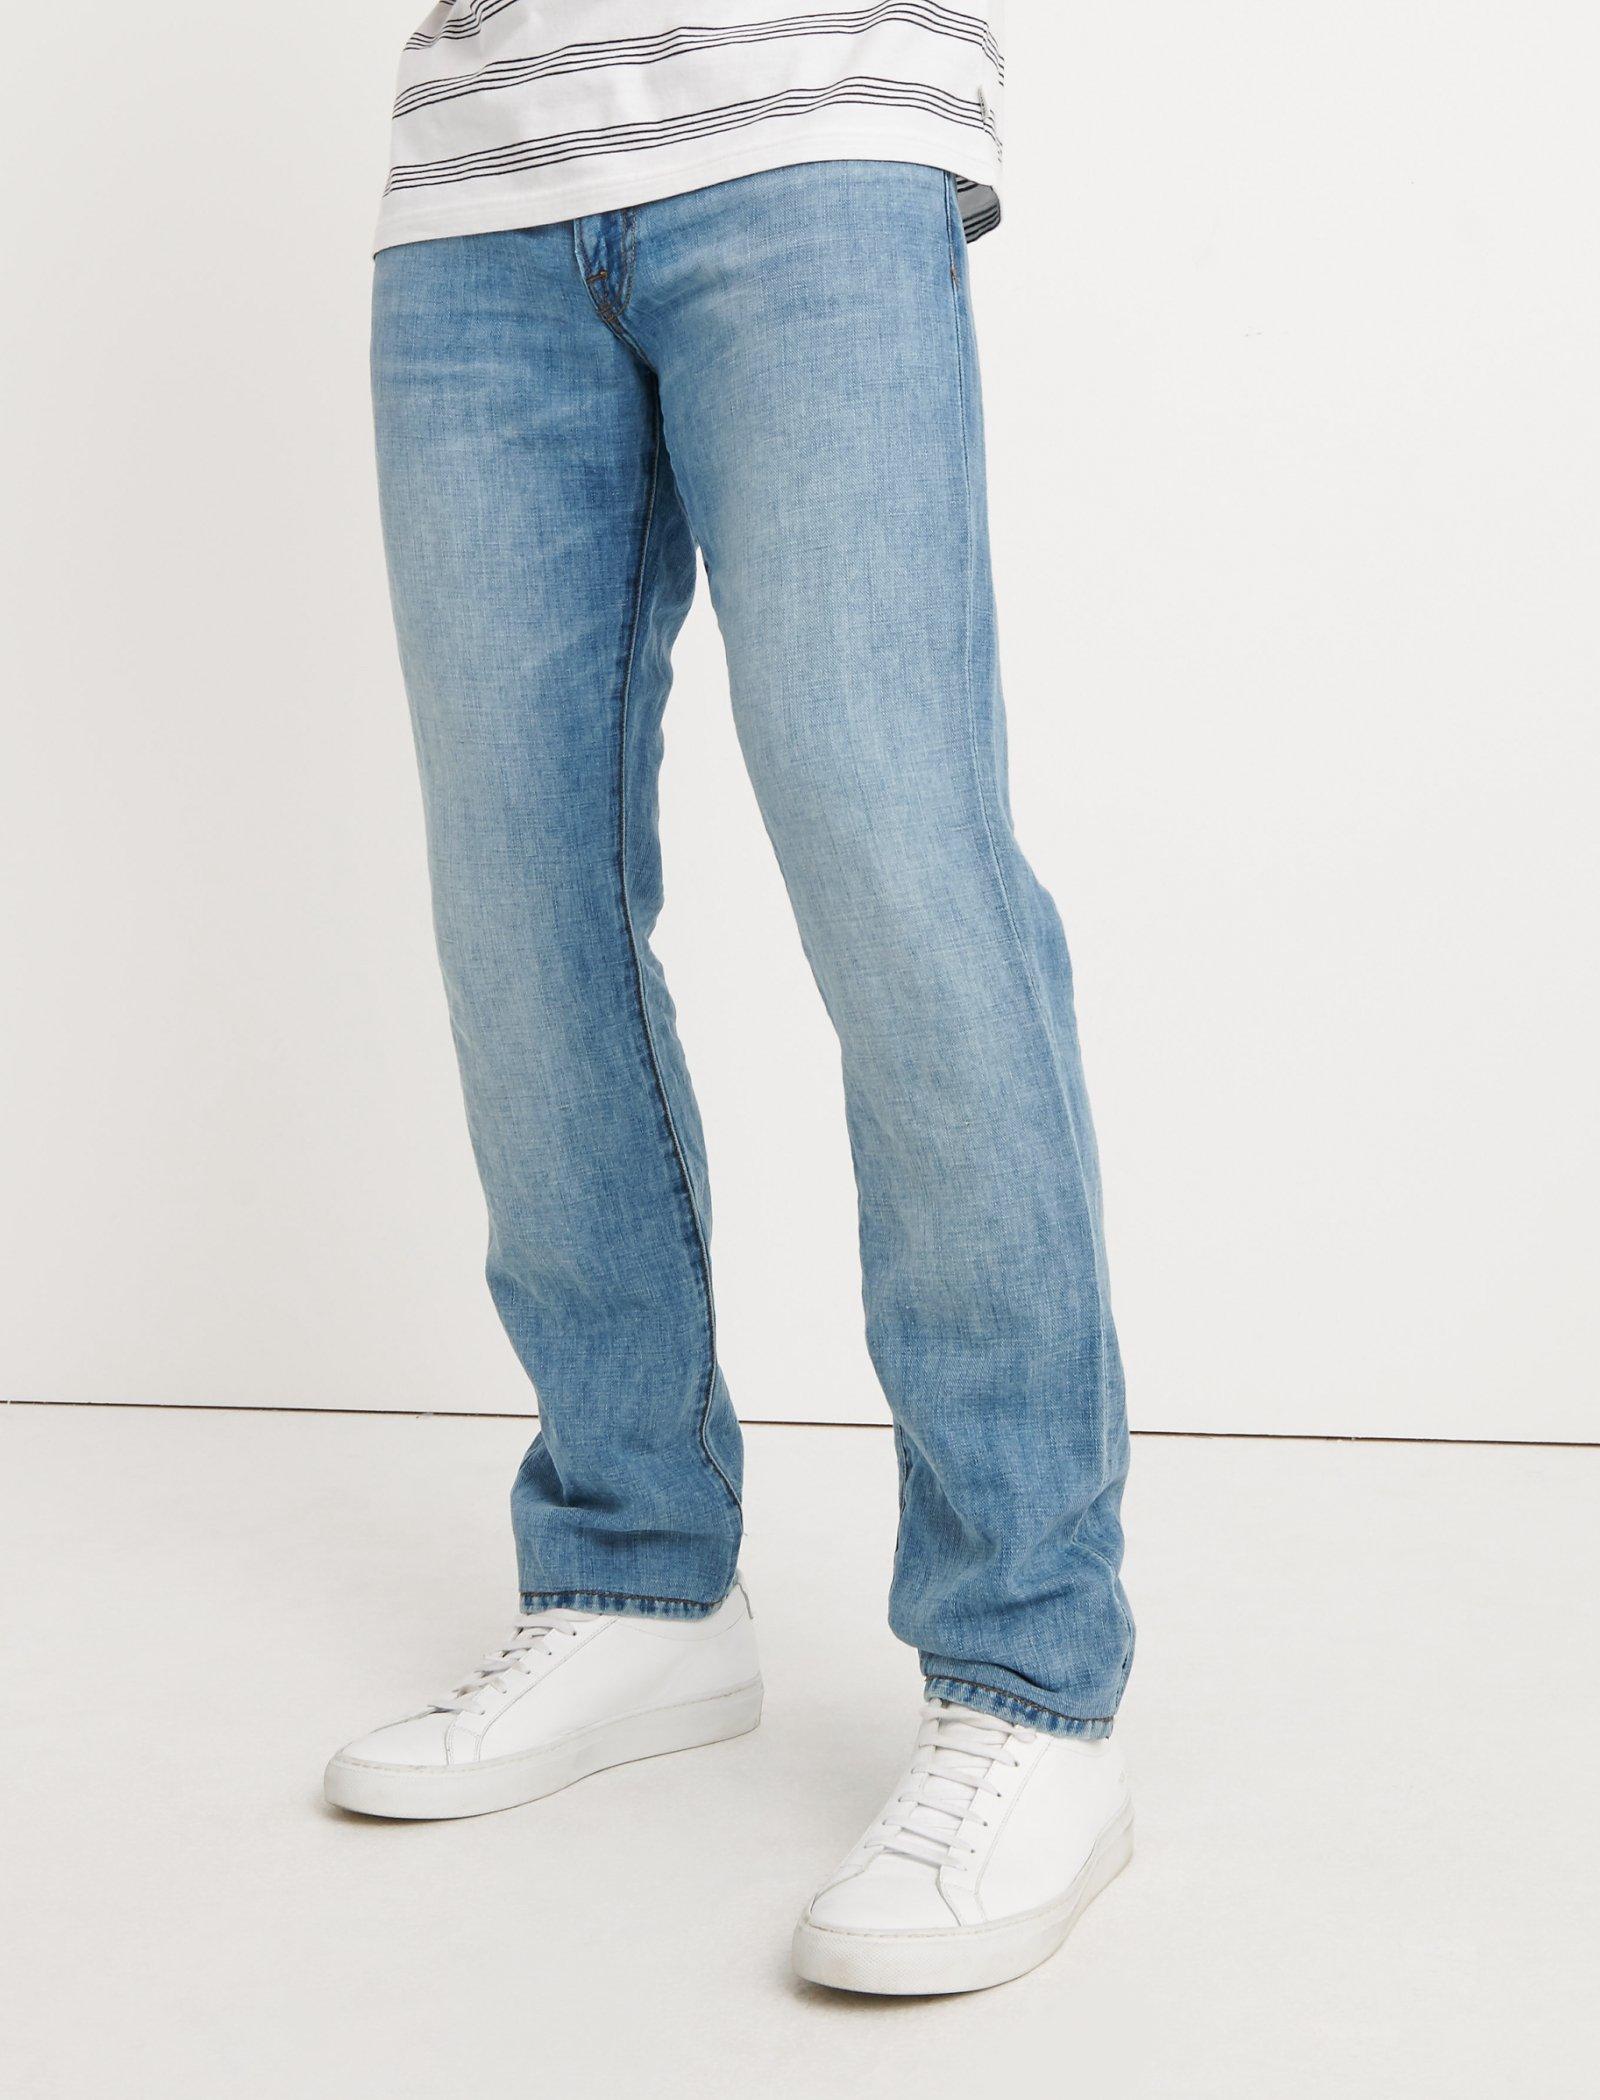 lucky jeans 121 slim